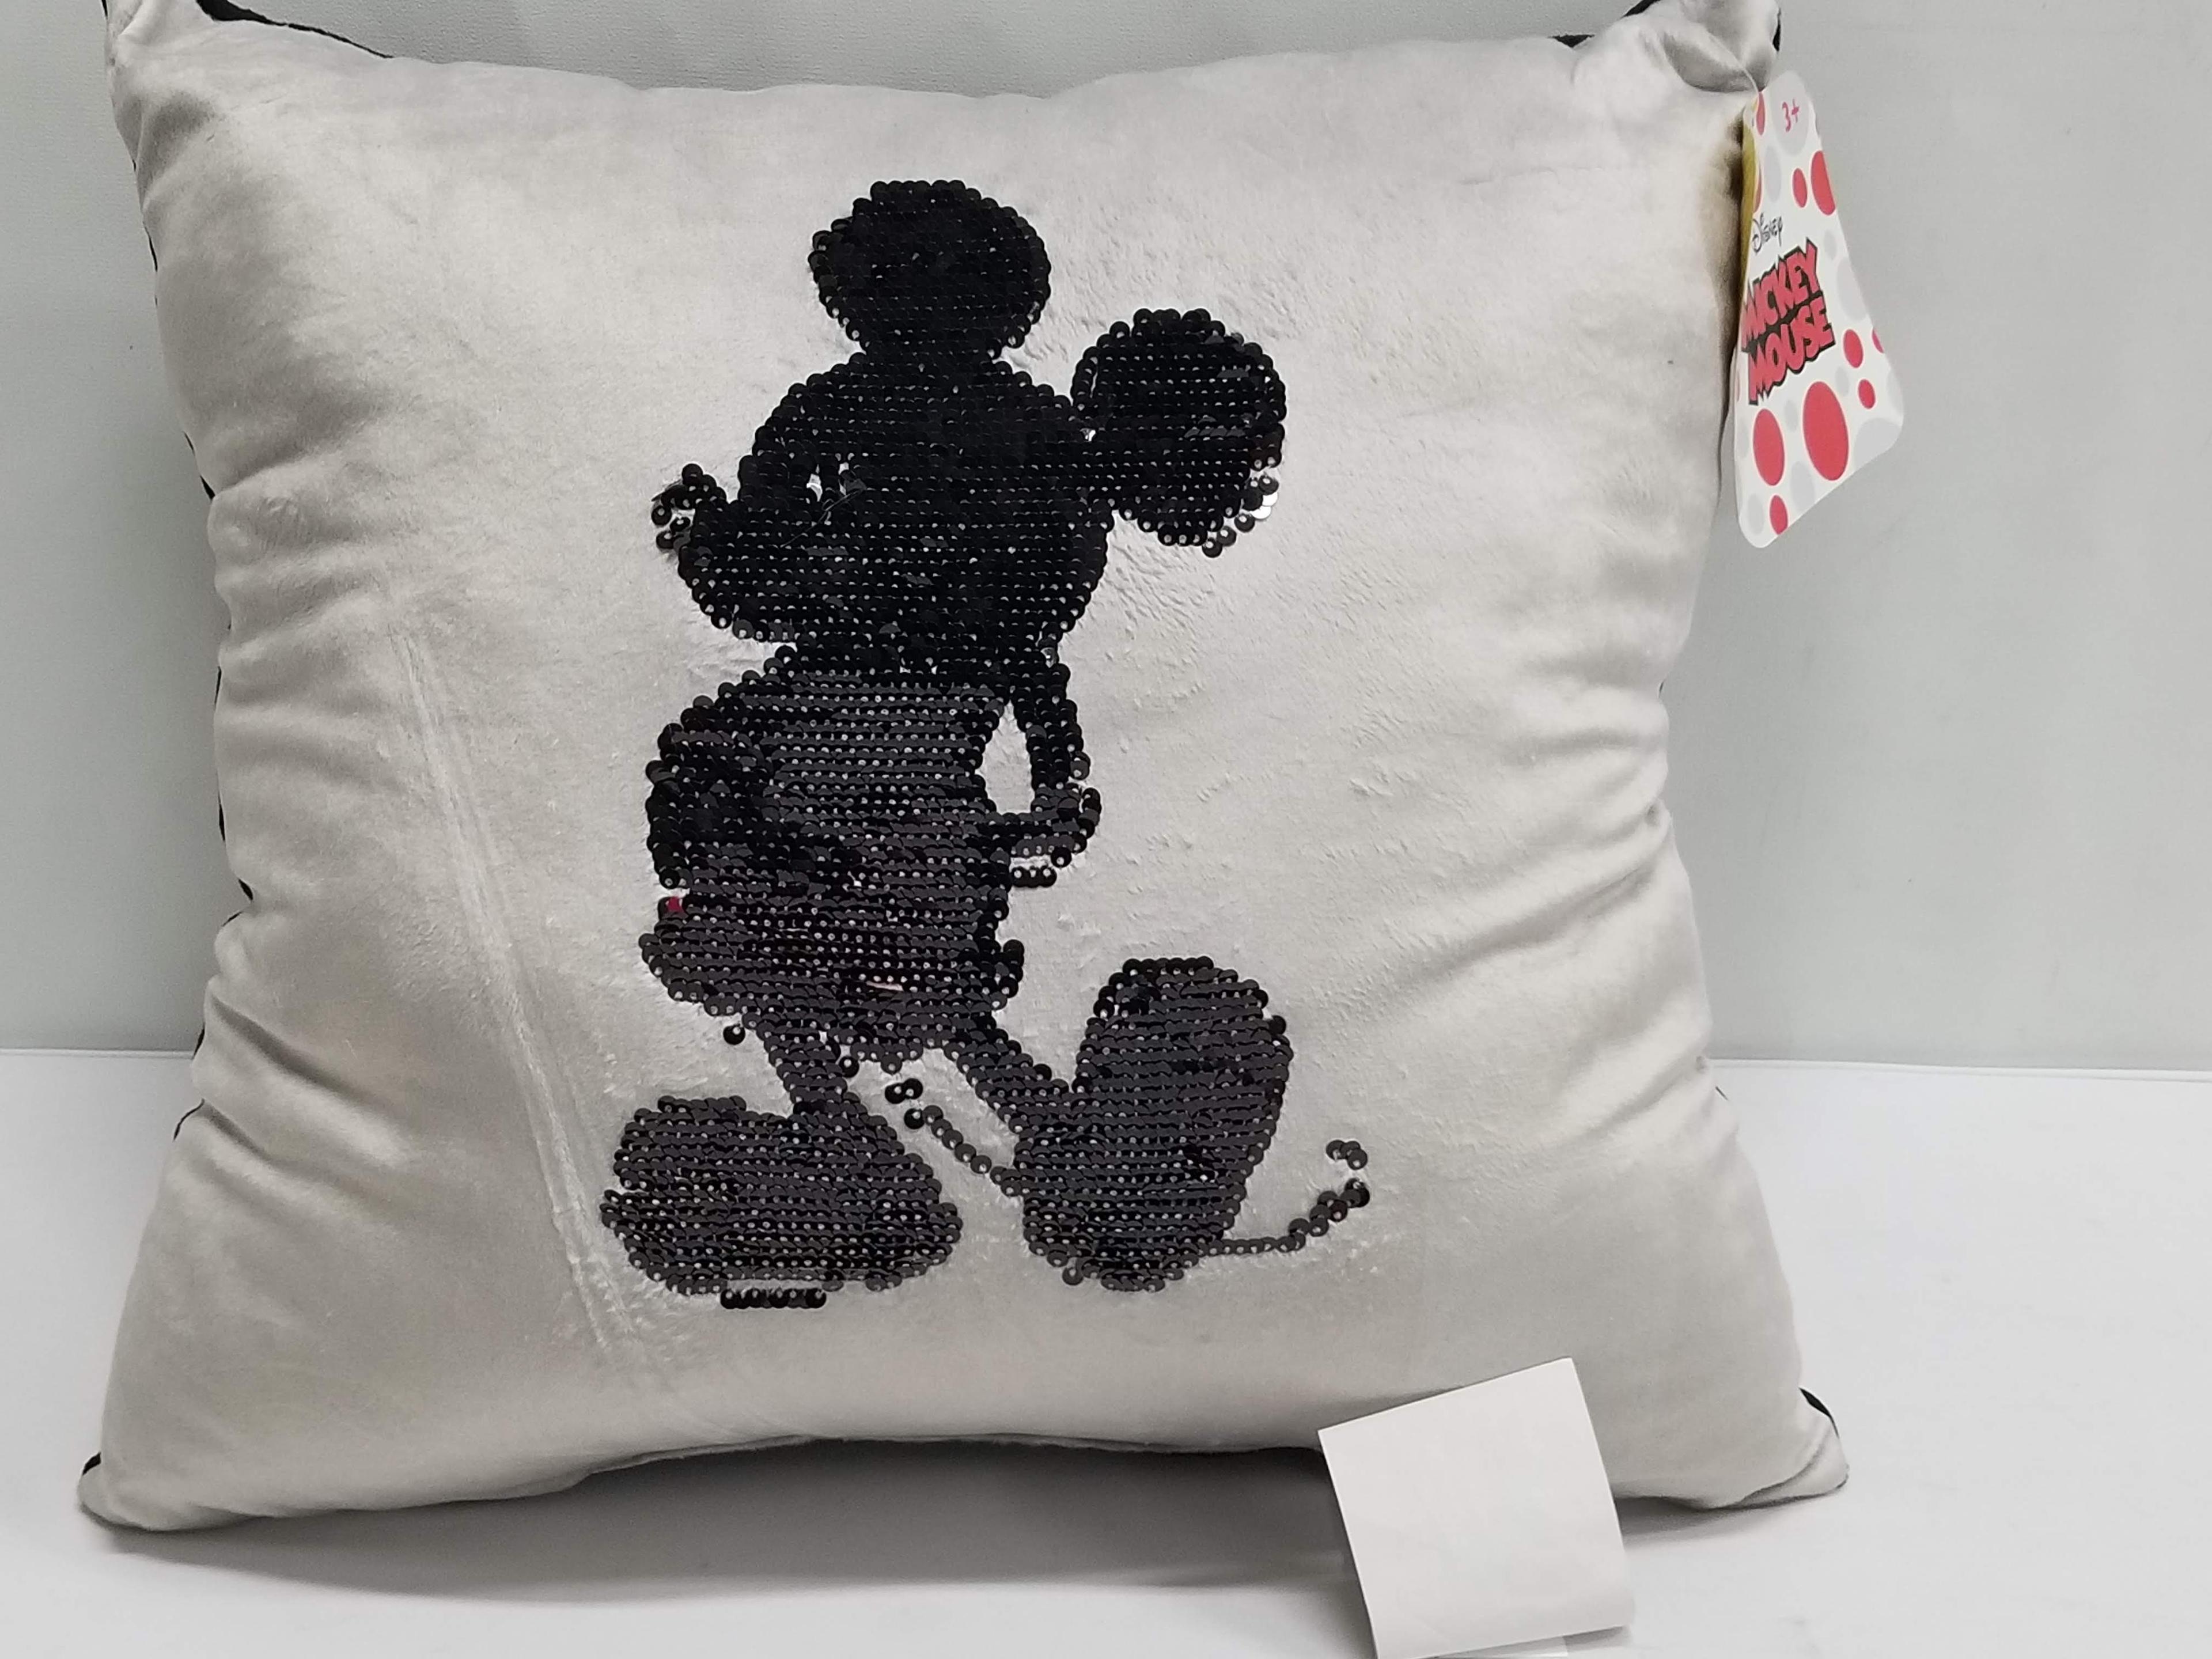 Mickey Mouse Reversible Sequin Pillow - 17"x17" - New